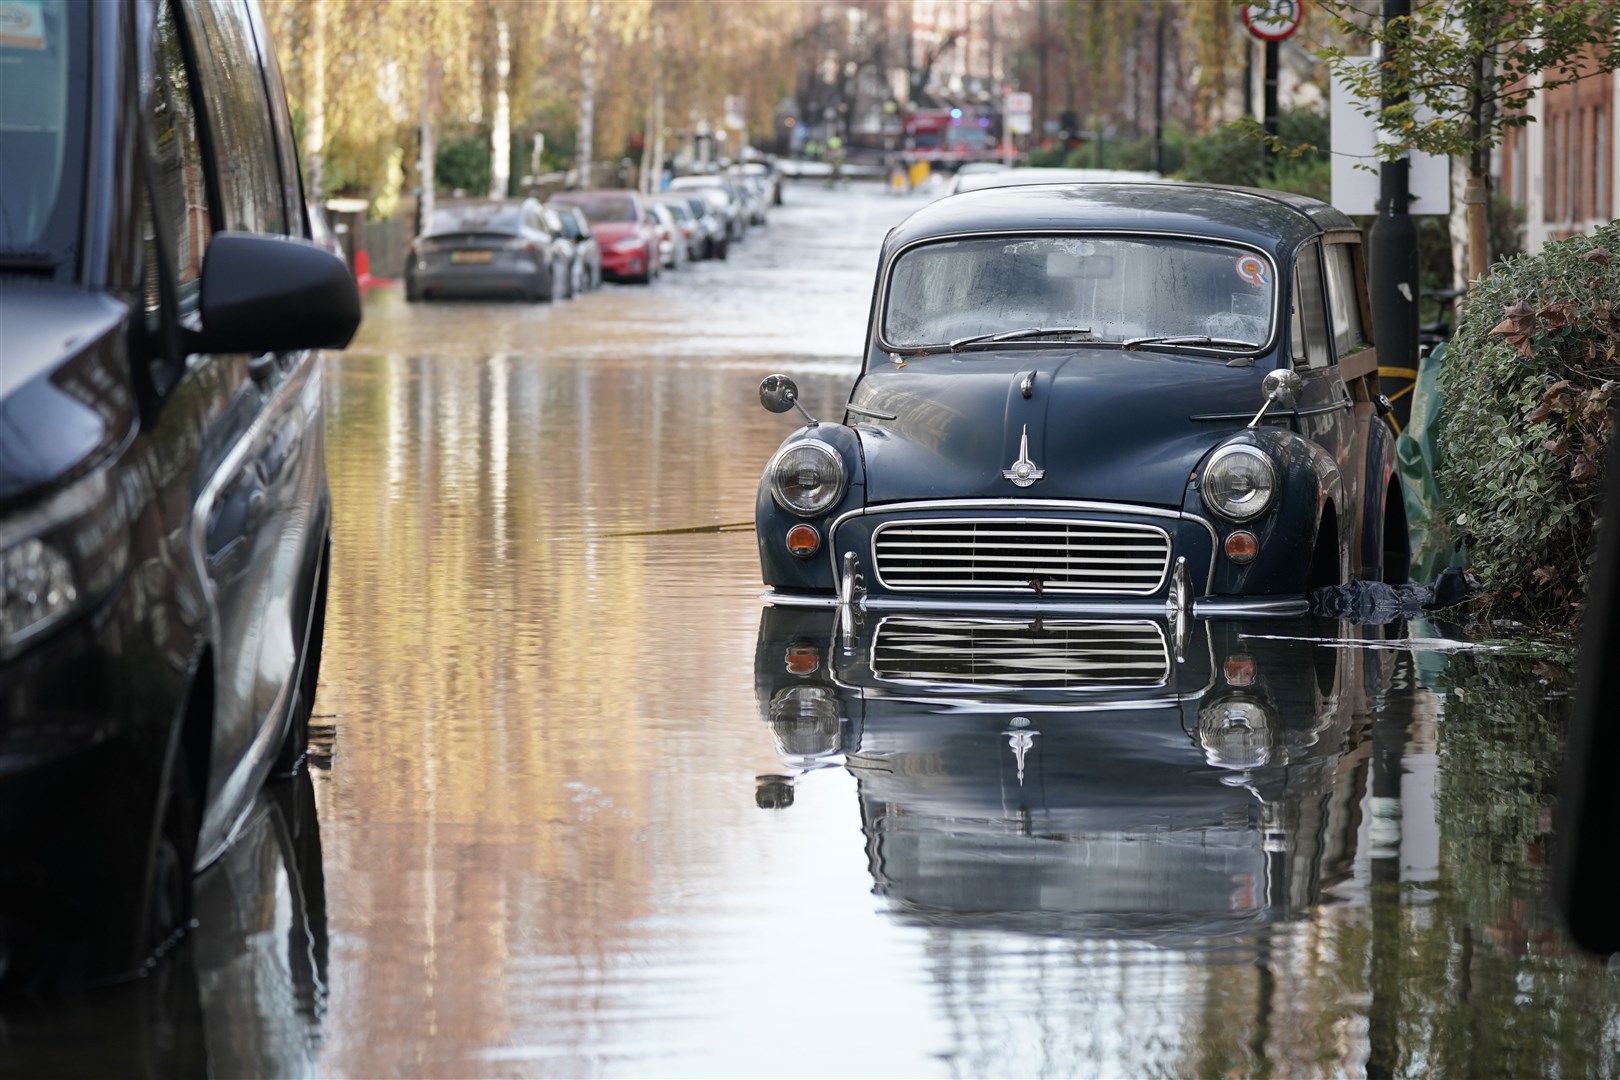 The flooding submerged many cars parked on the road (Yui Mok/PA)